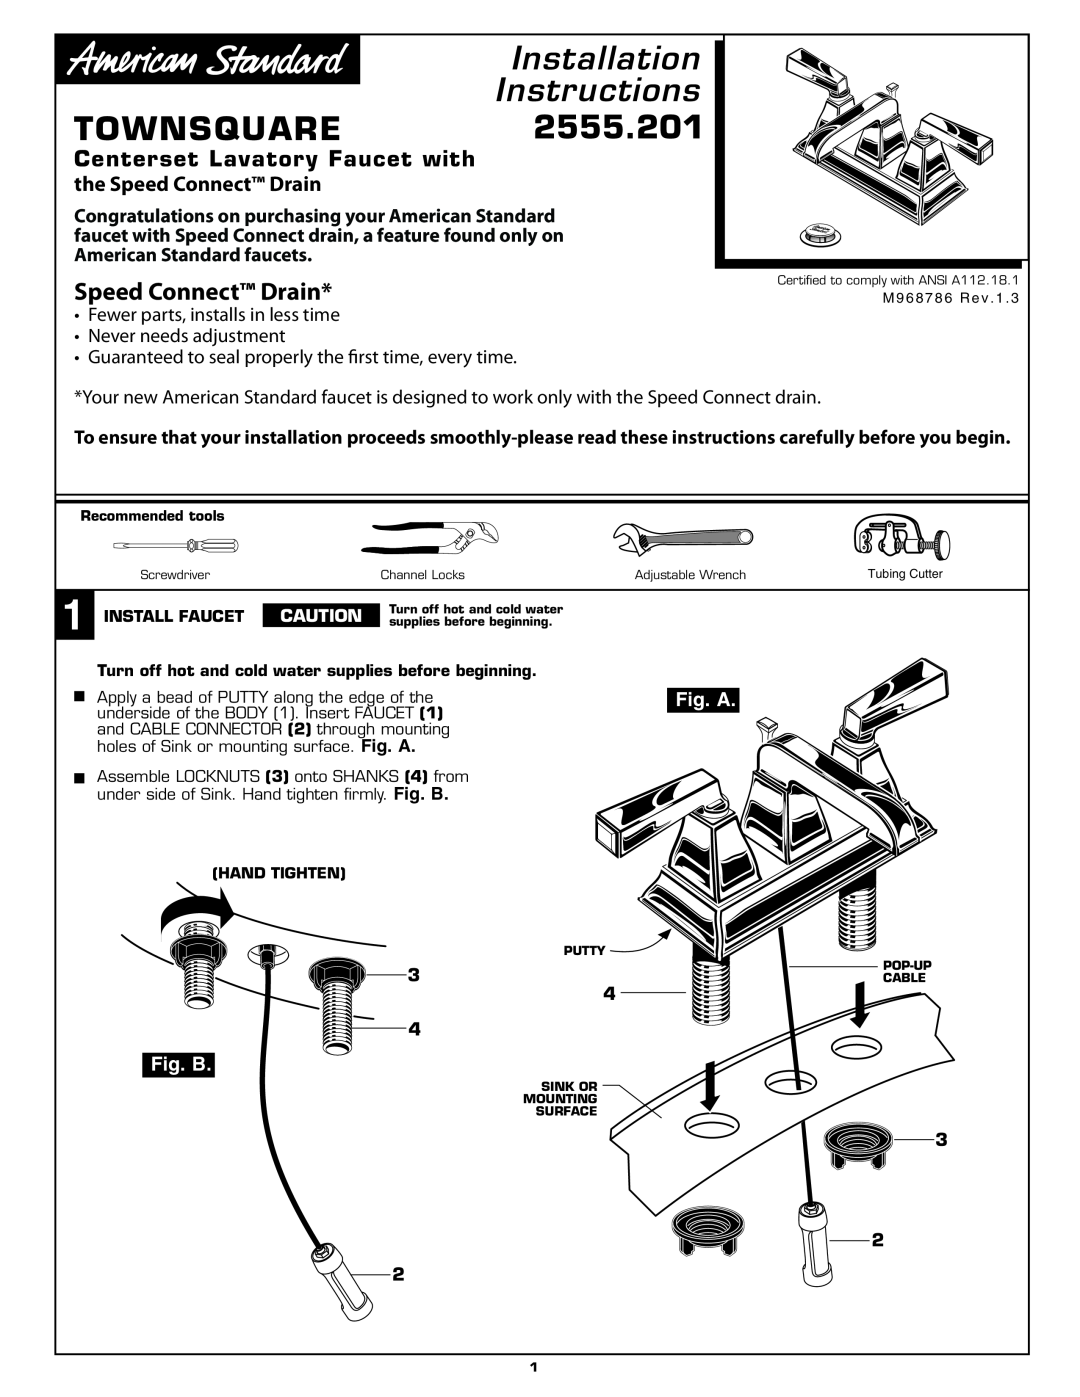 American Standard 2555.201 installation instructions Speed Connect Drain, Fig. A, Fig. B, Installation Instructions, Putty 